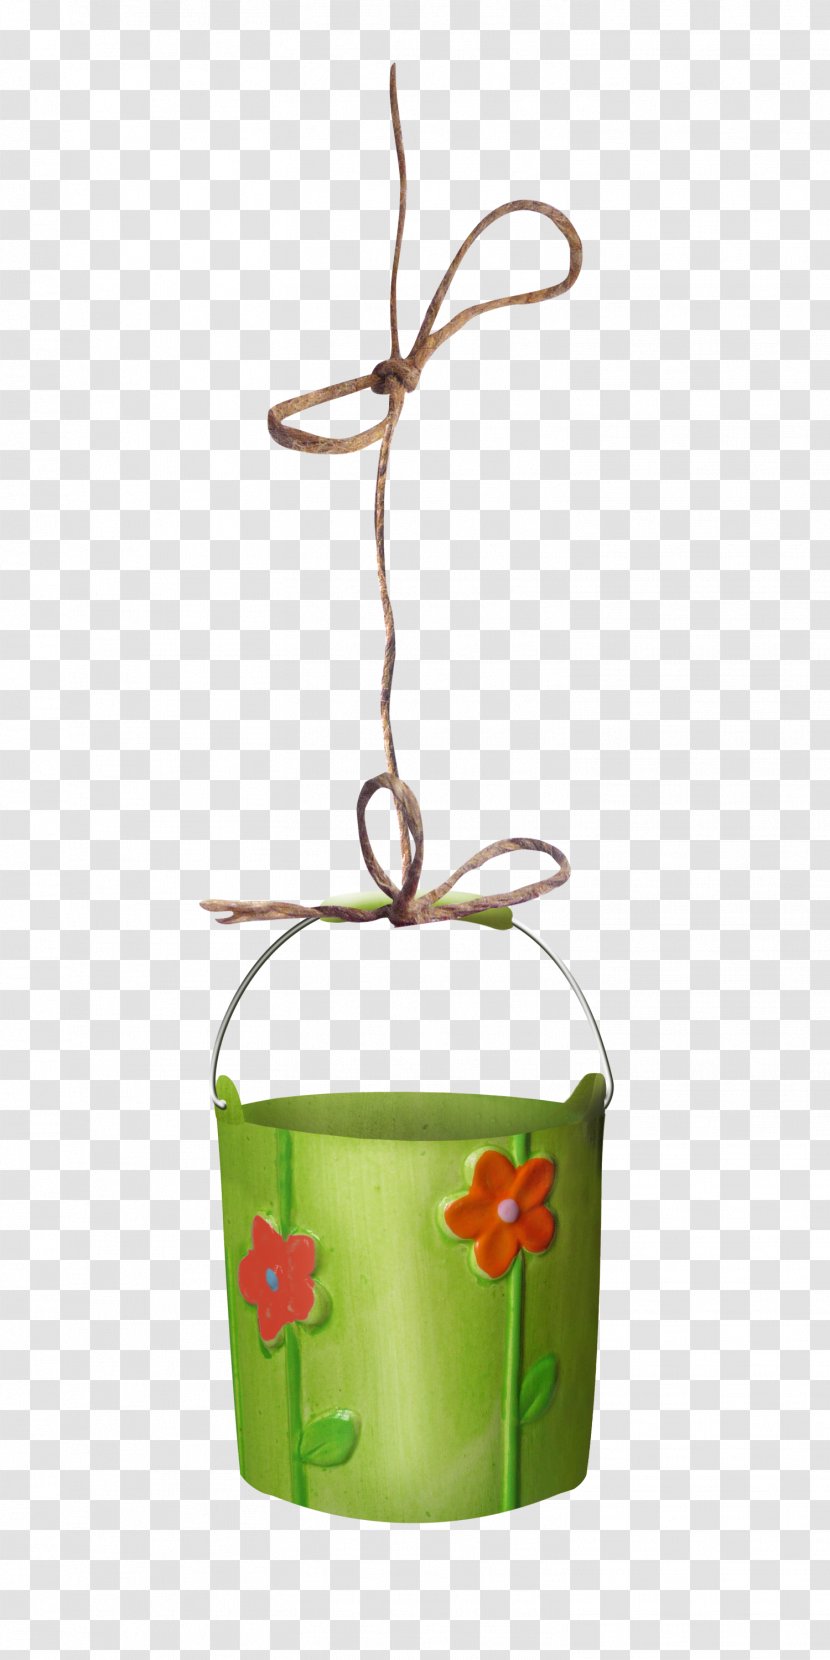 Novel Bucket Icon - Tool - Hanging Buckets Transparent PNG